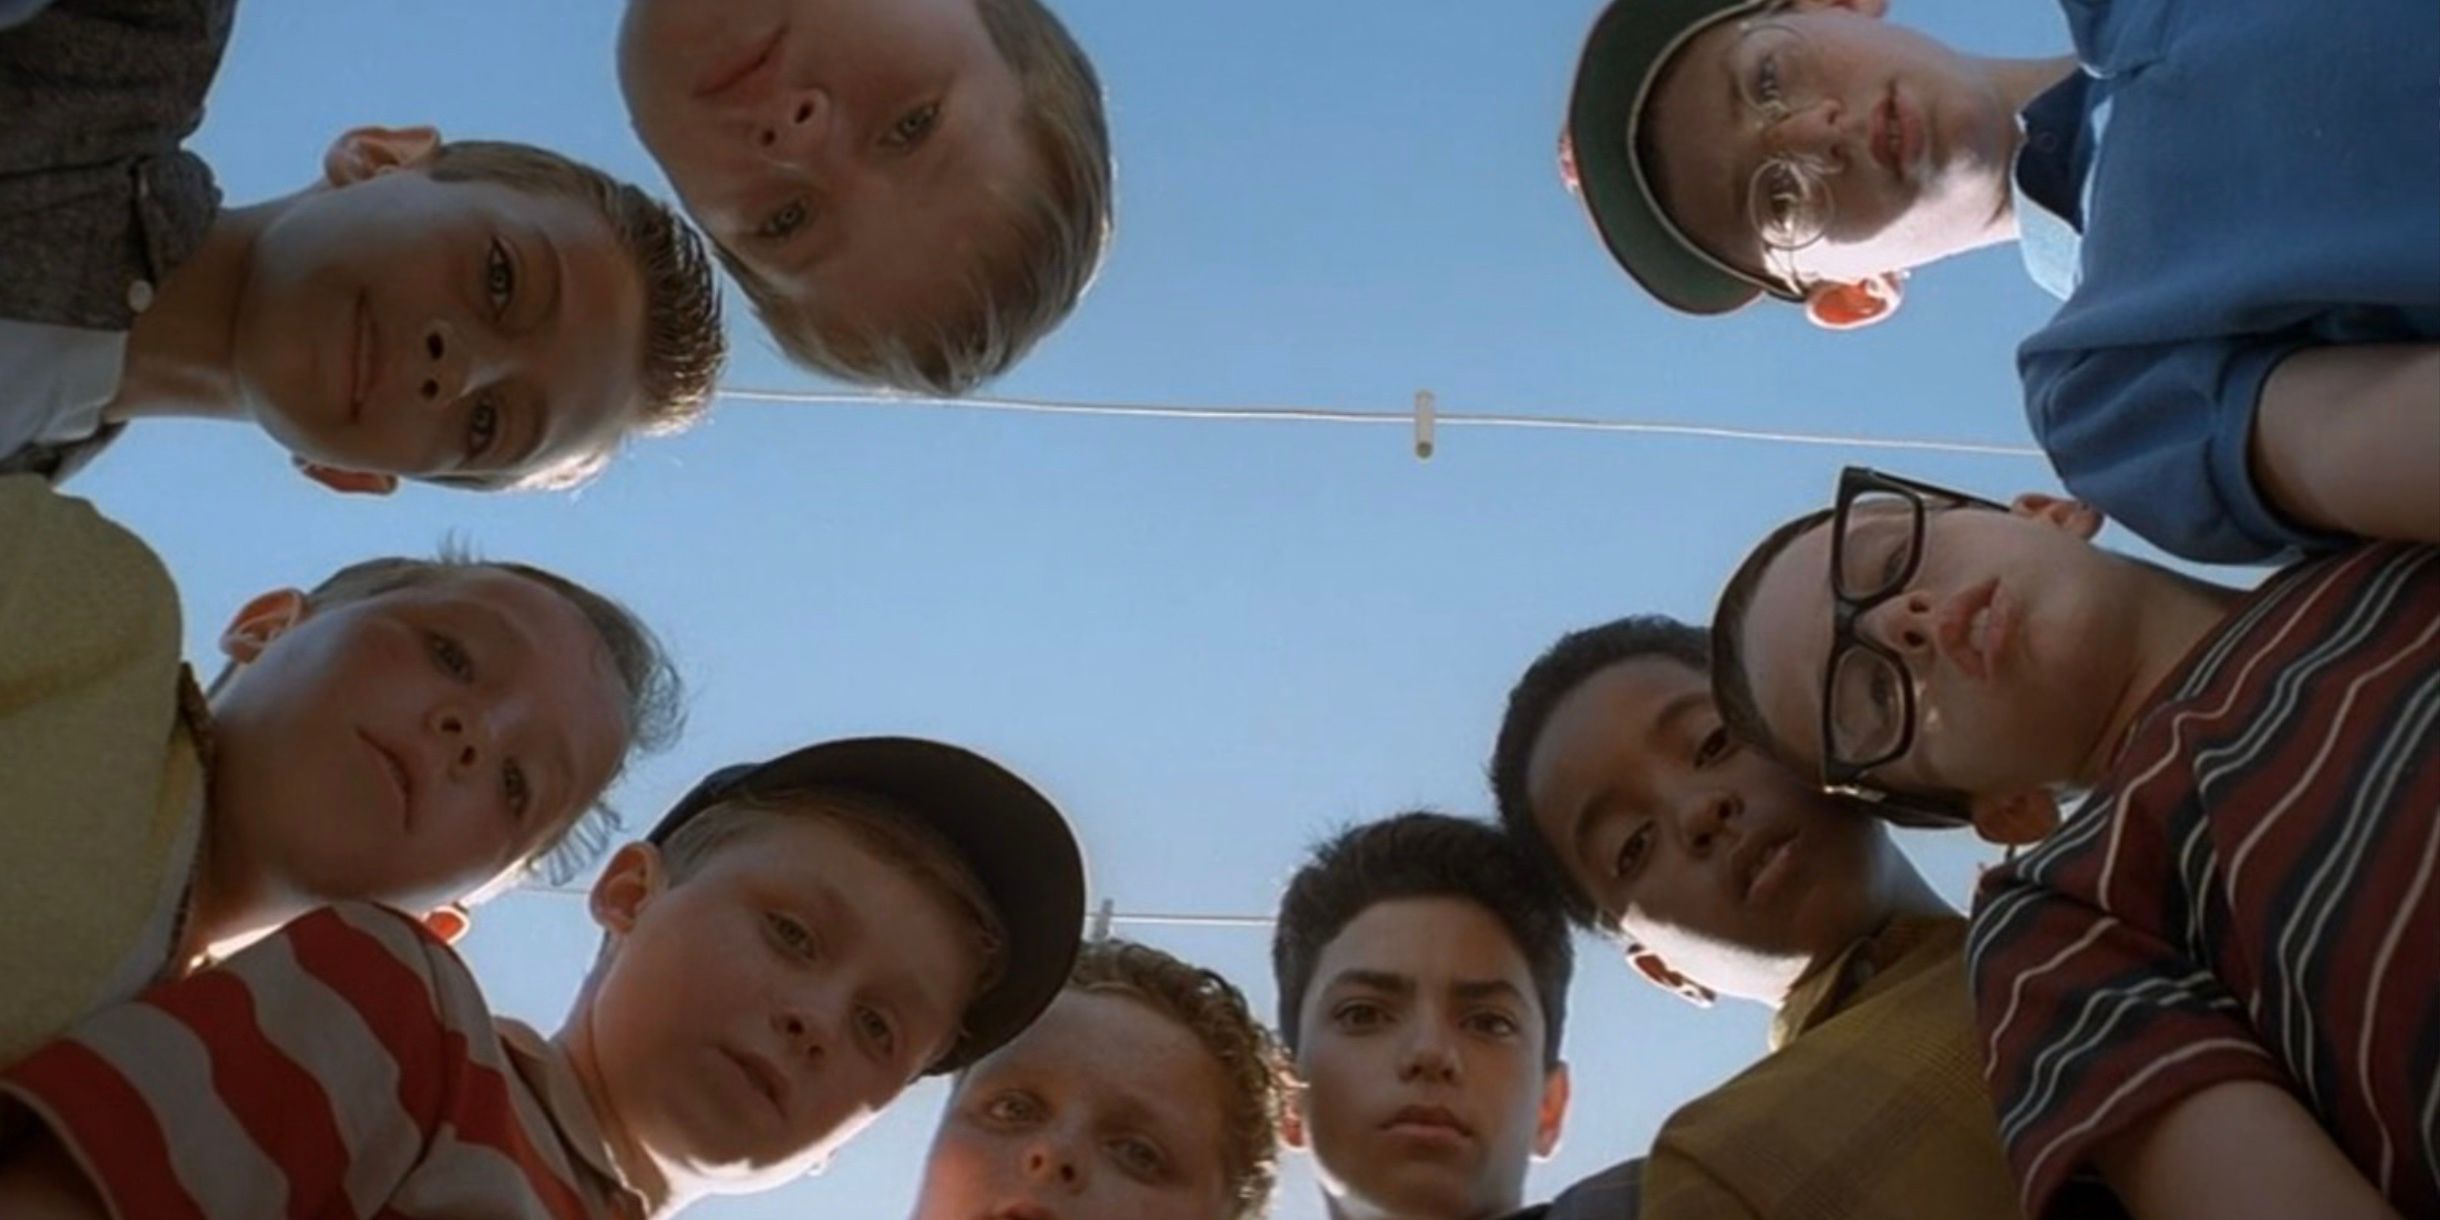 The kids of the Sandlot look down into the camera